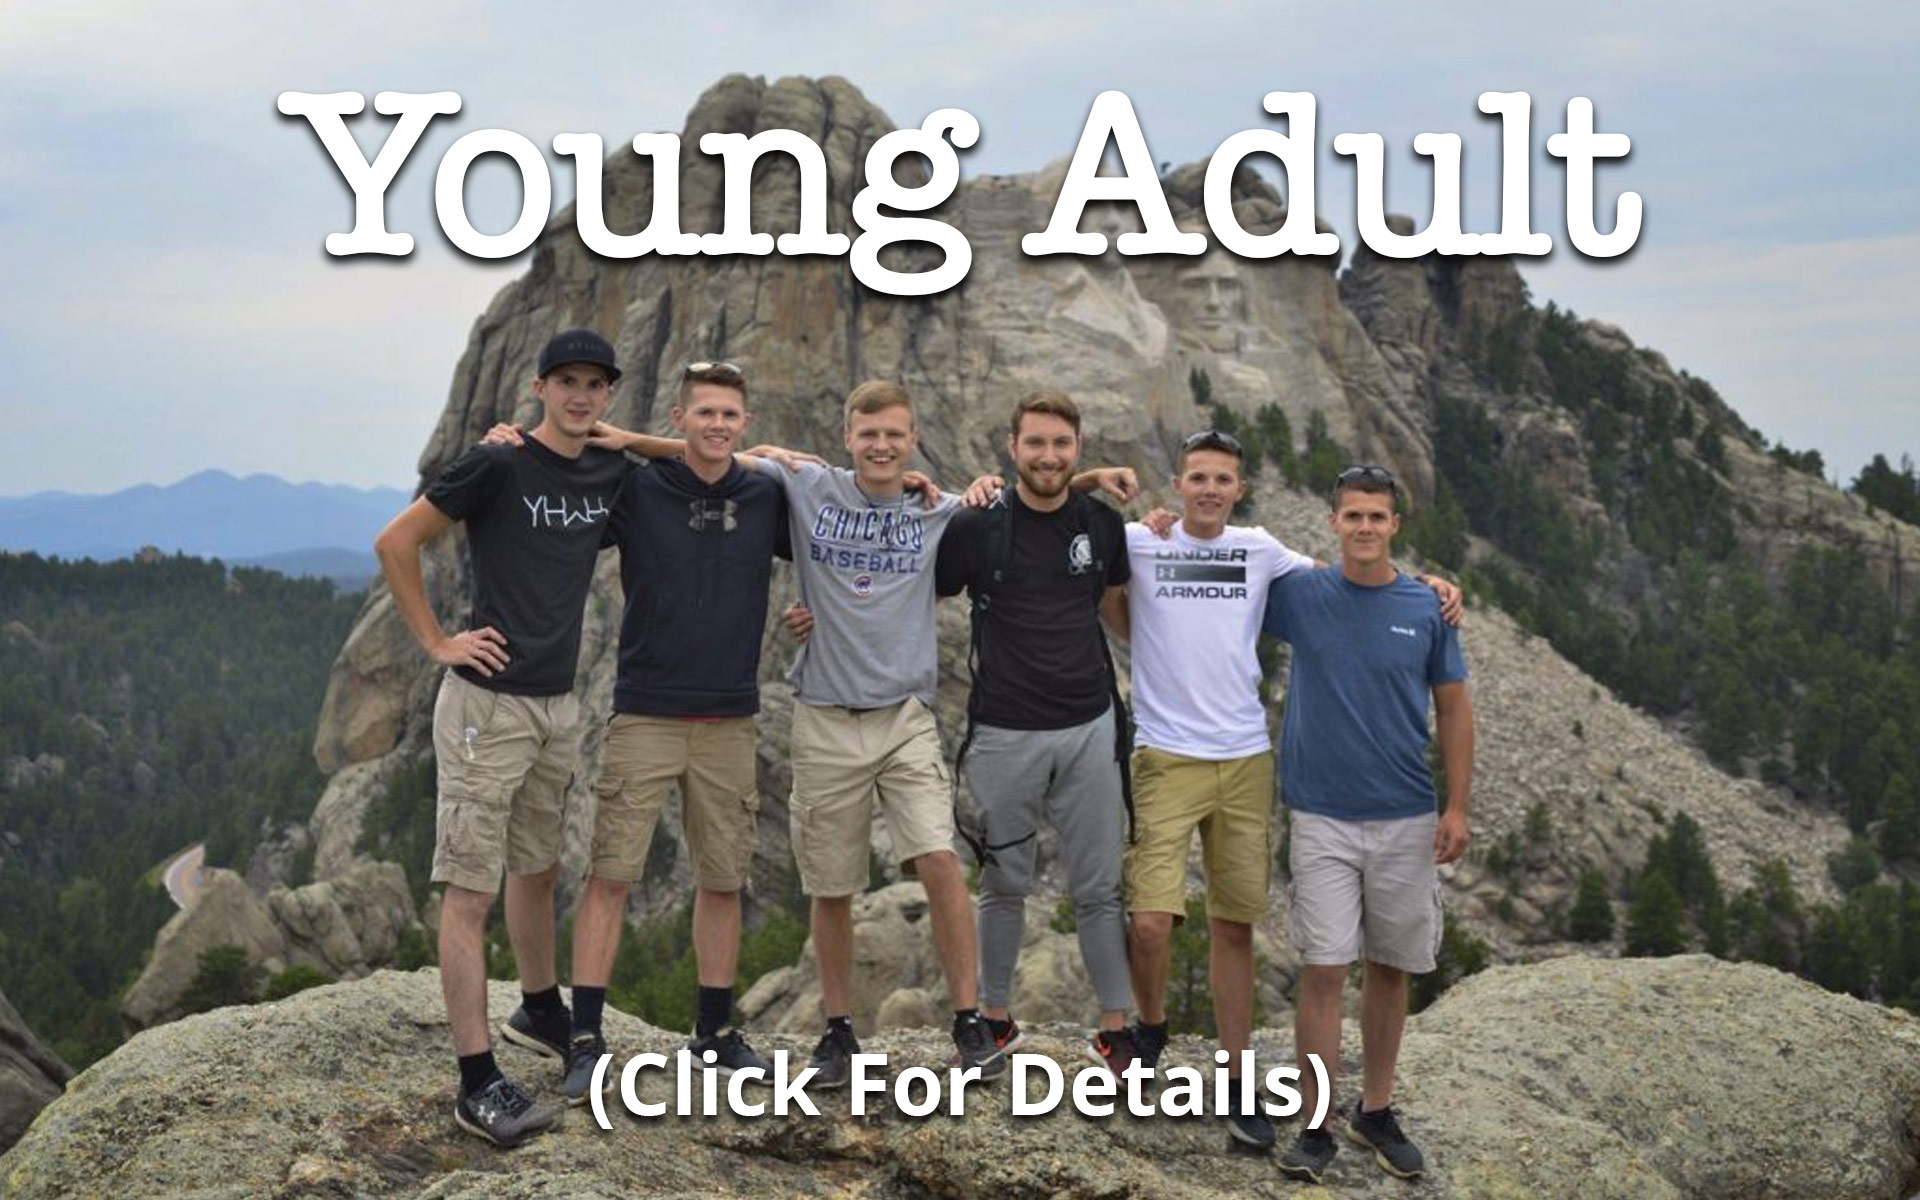 young-adult